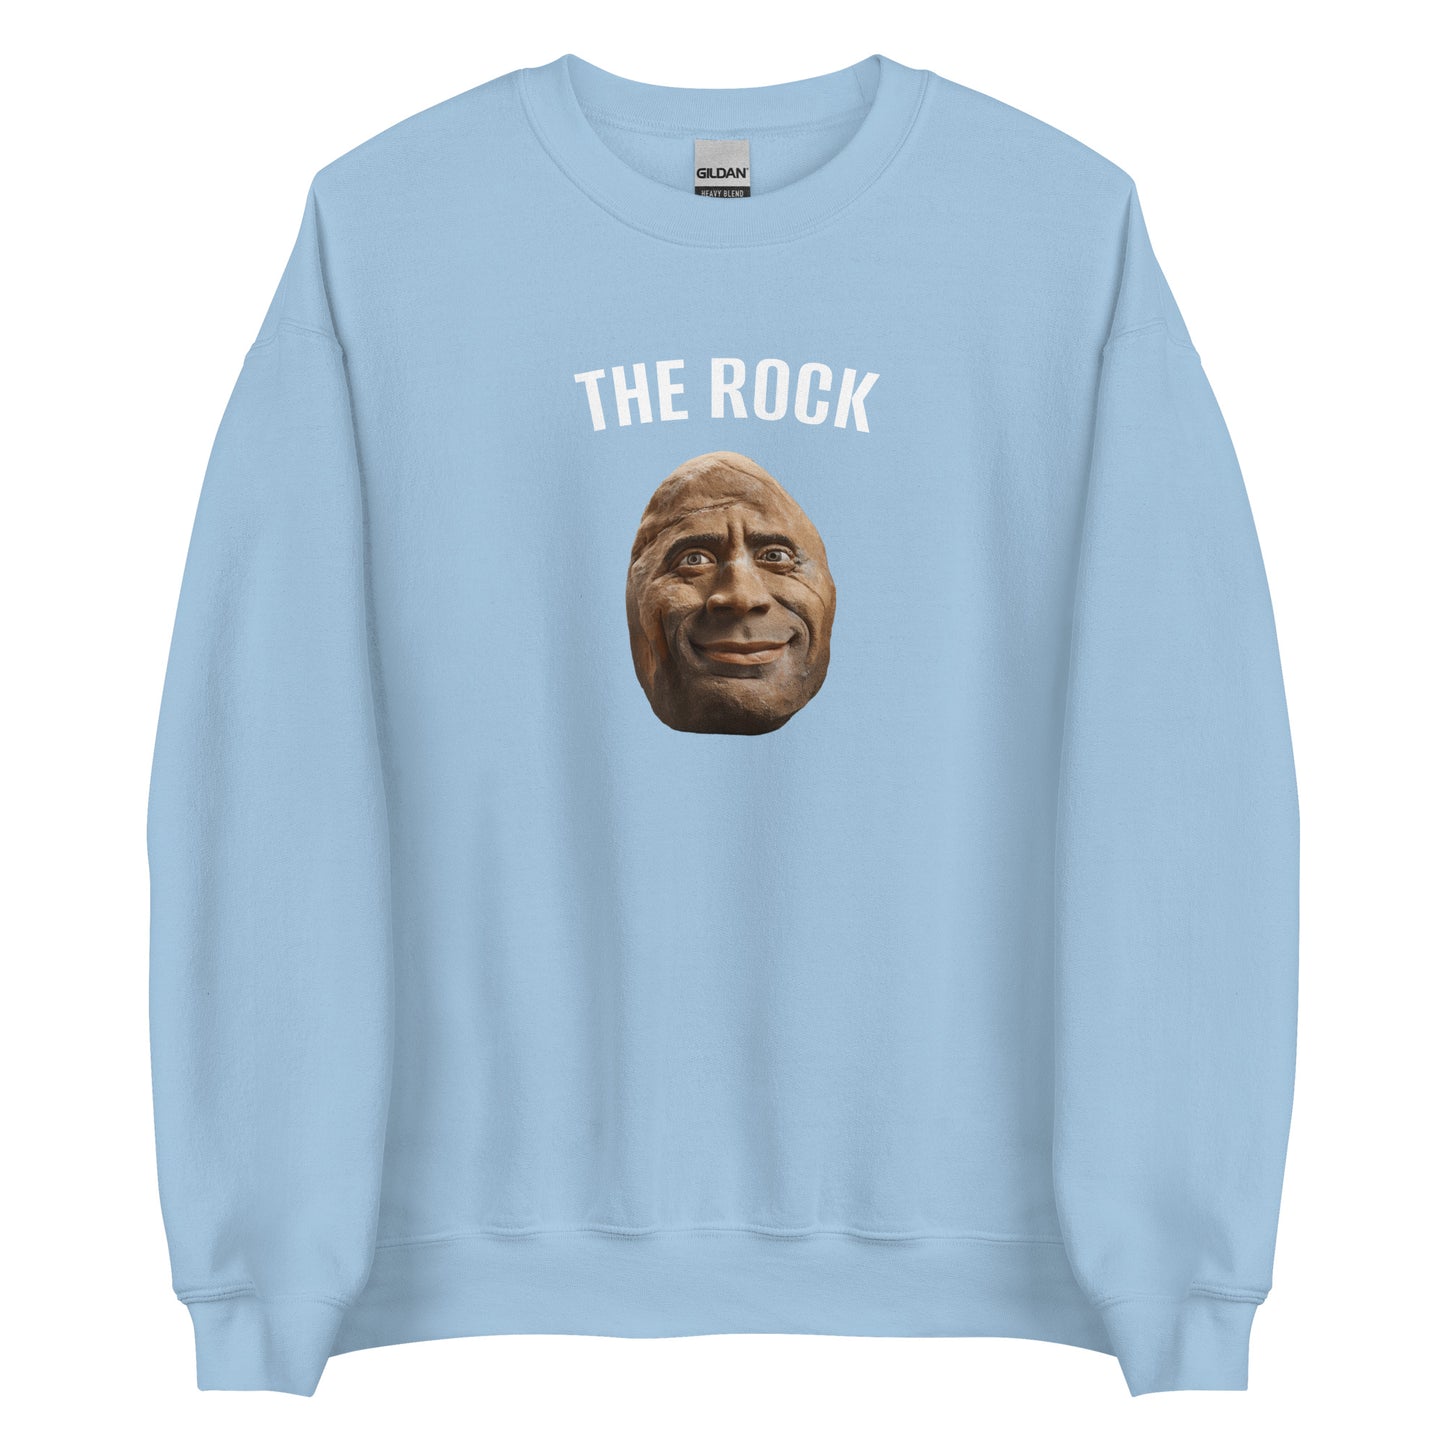 THE ROCK